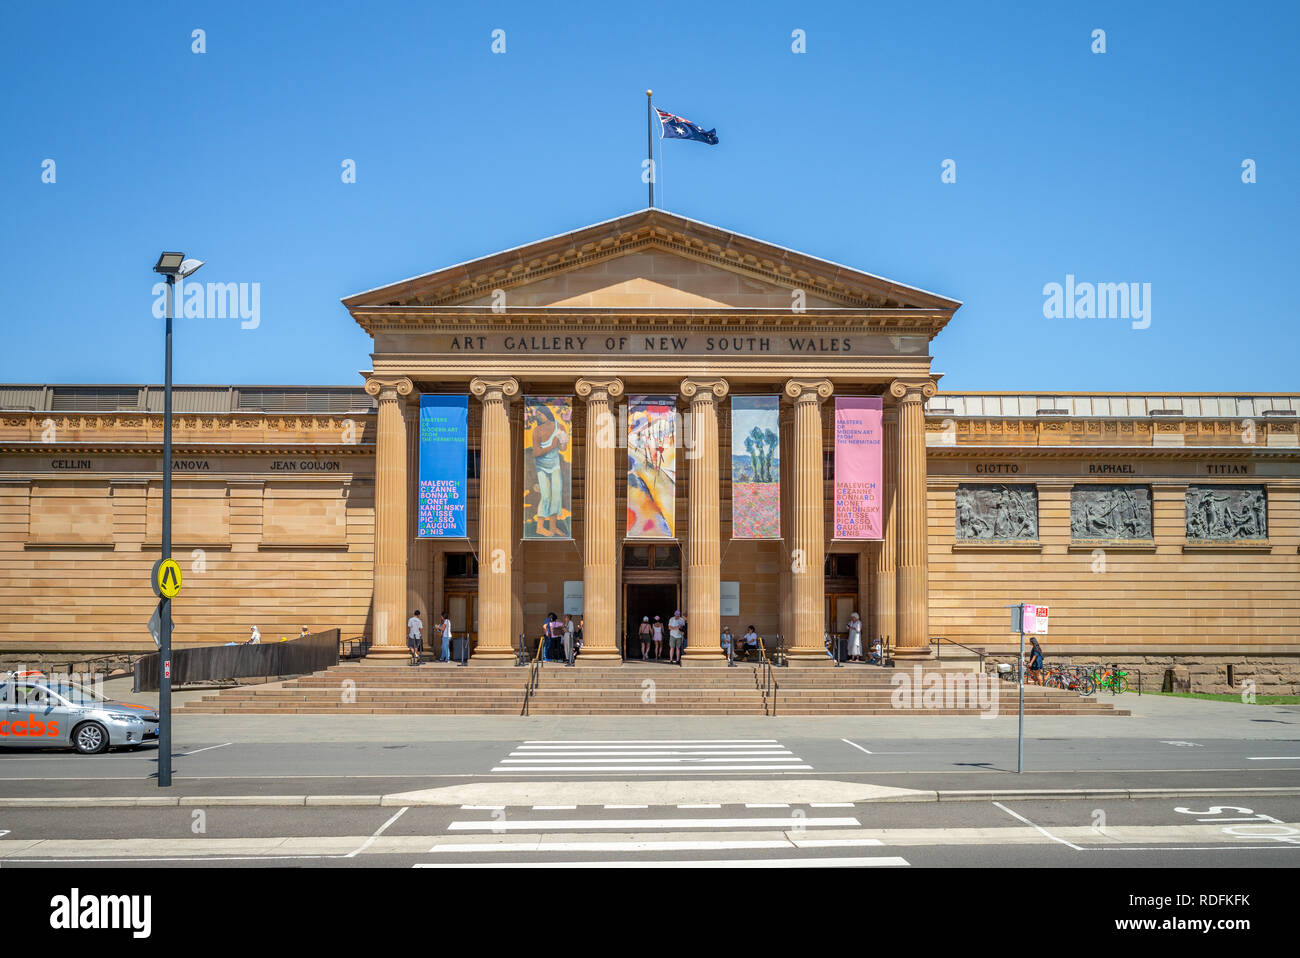 Sydney, Australia - January 8, 2019: art gallery of new south wales,  the most important public gallery in Sydney and one of the largest in Australia Stock Photo